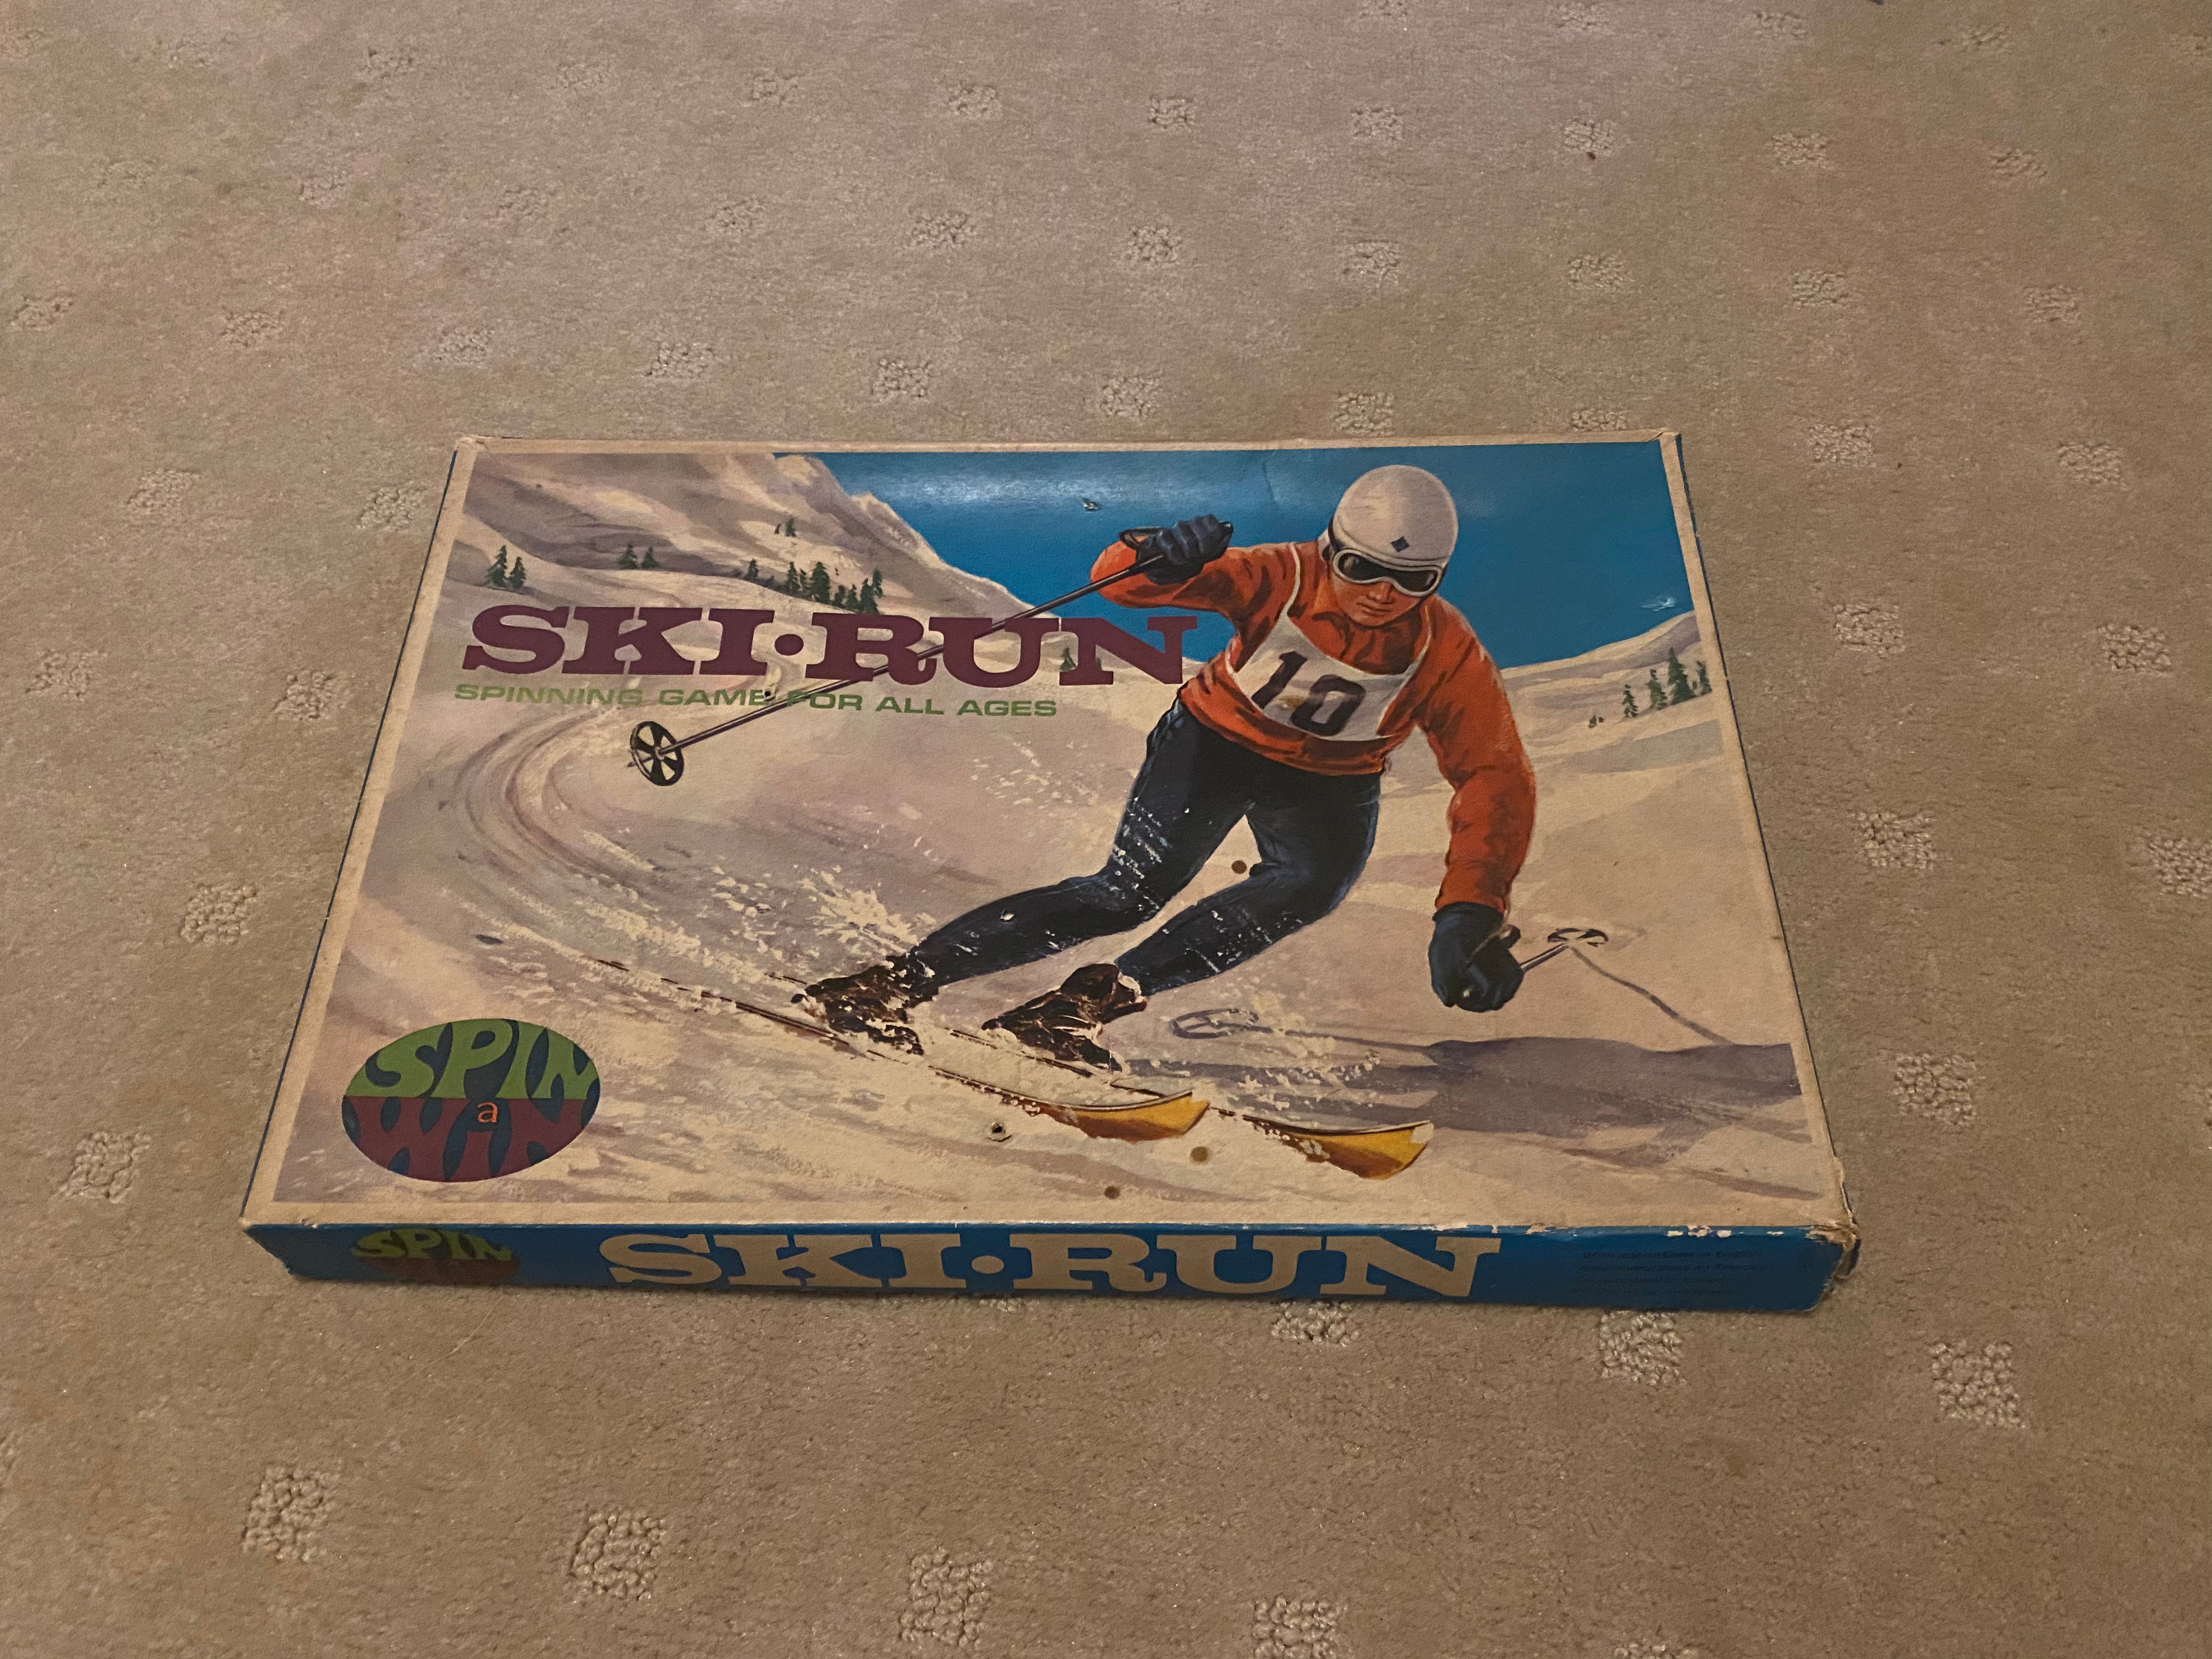 Vintage Ski Run: Spinning Game All Ages